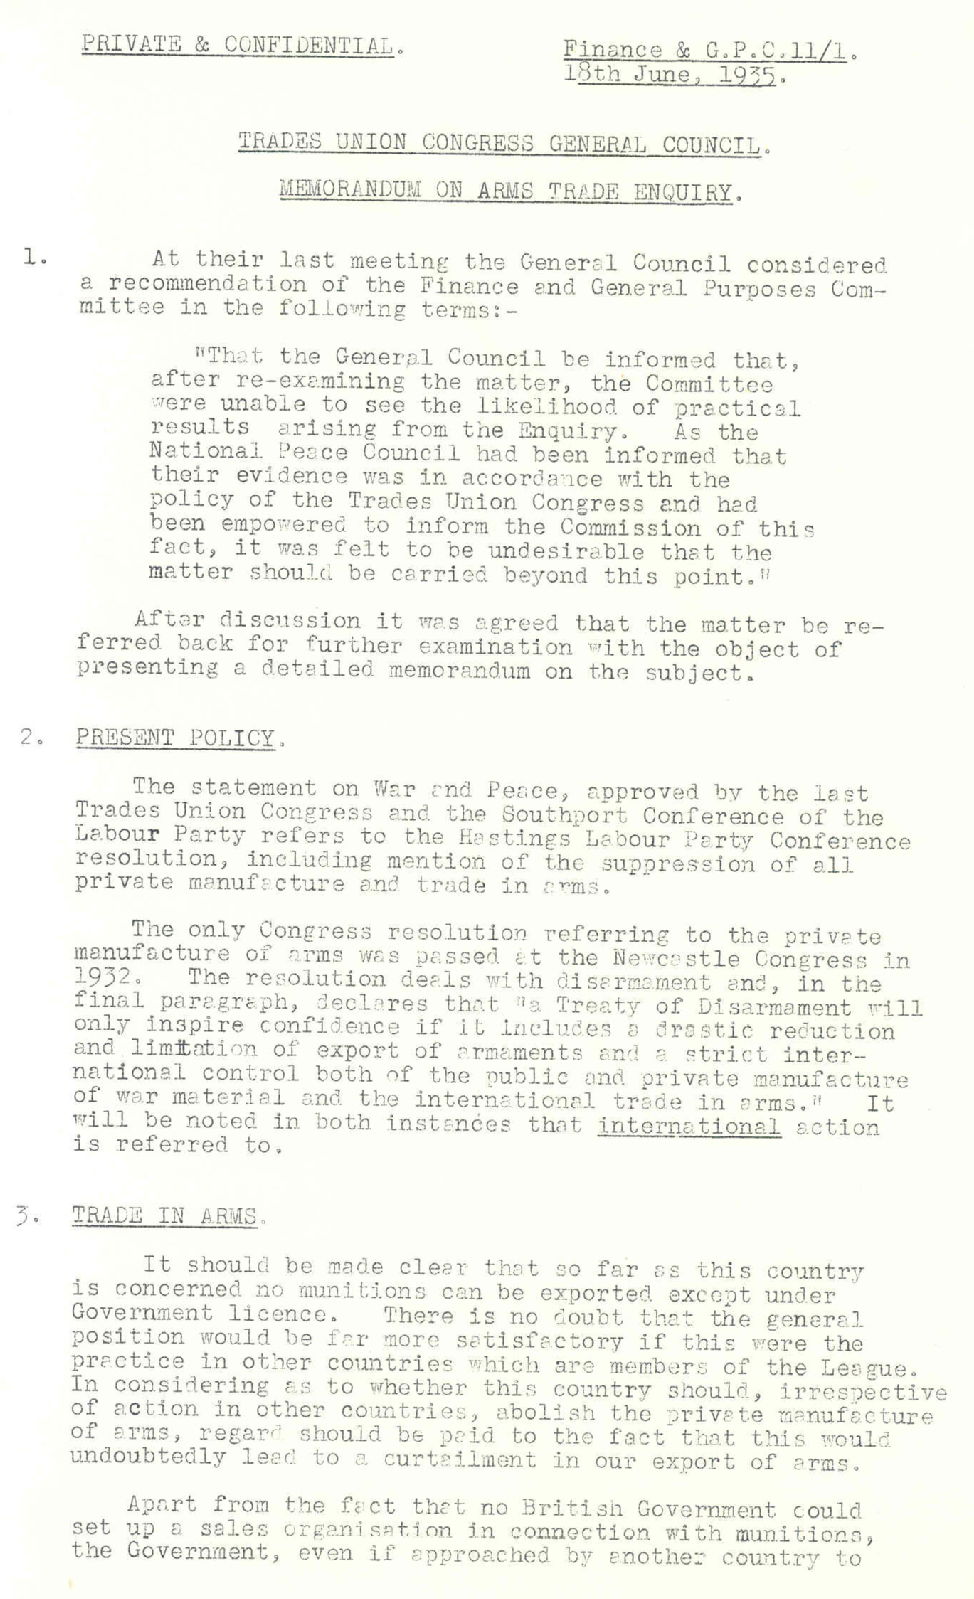 Memorandum on the Royal Commission of Enquiry into the Private Manufacture of and Trading in Arms, June 1935